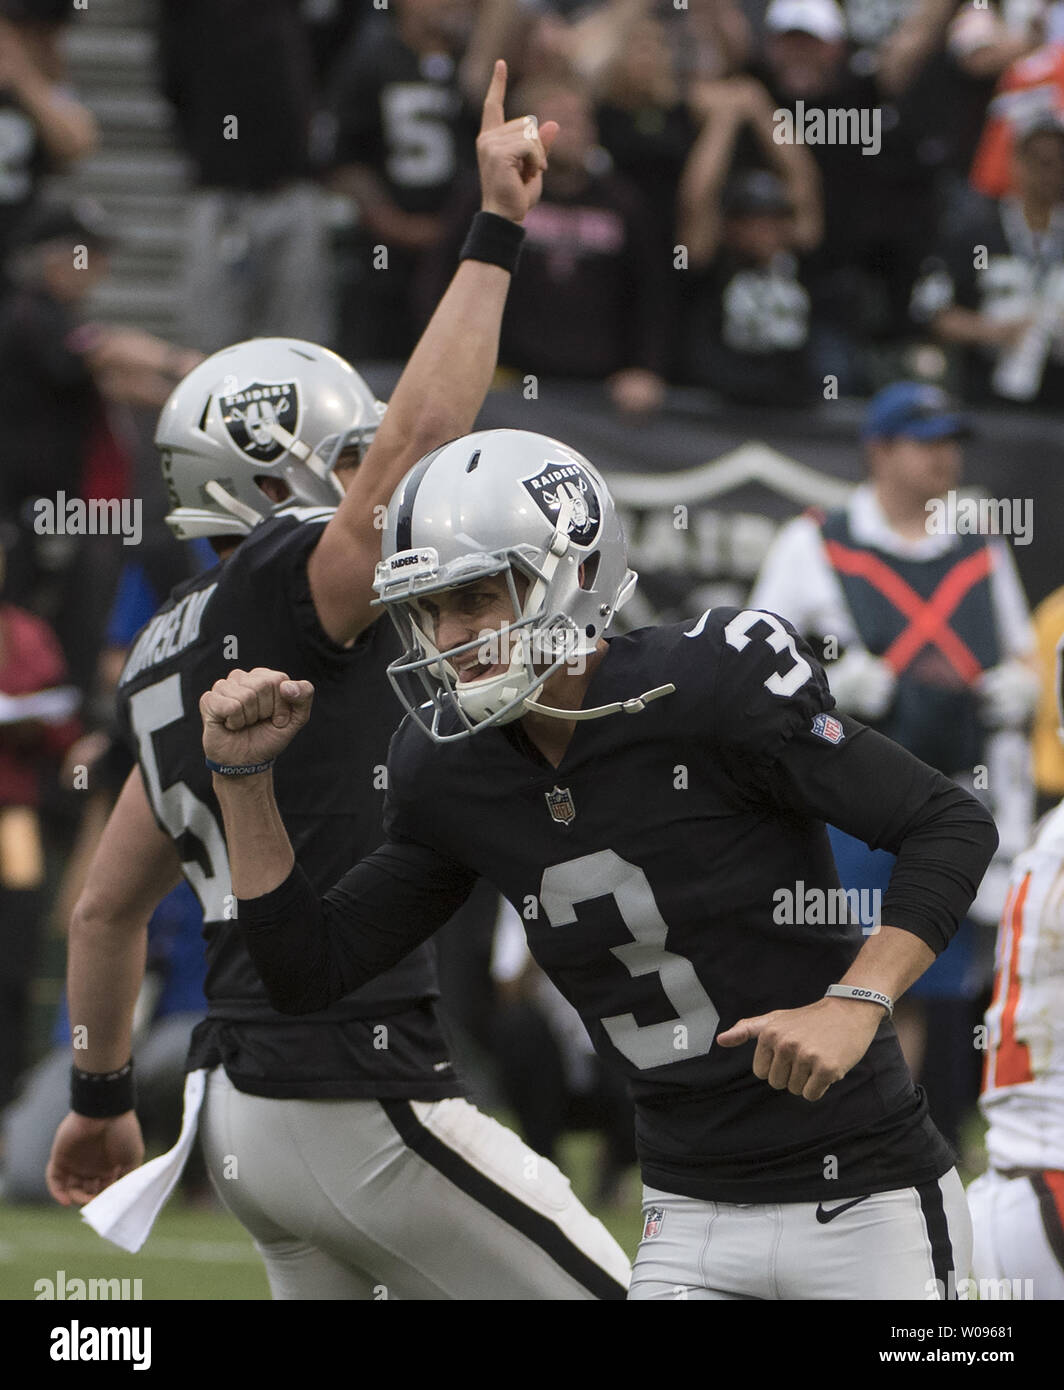 Oakland Raiders kicker Matt McGrane (3) celebrates as holder Johnny Townsend  raises a hand after kicking a 29 yrd field goal to defeat the Cleveland Browns in overtime at the Coliseum in Oakland, California on September 30, 2018. The Raiders won 45-42.     Photo by Terry Schmitt/UPI Stock Photo